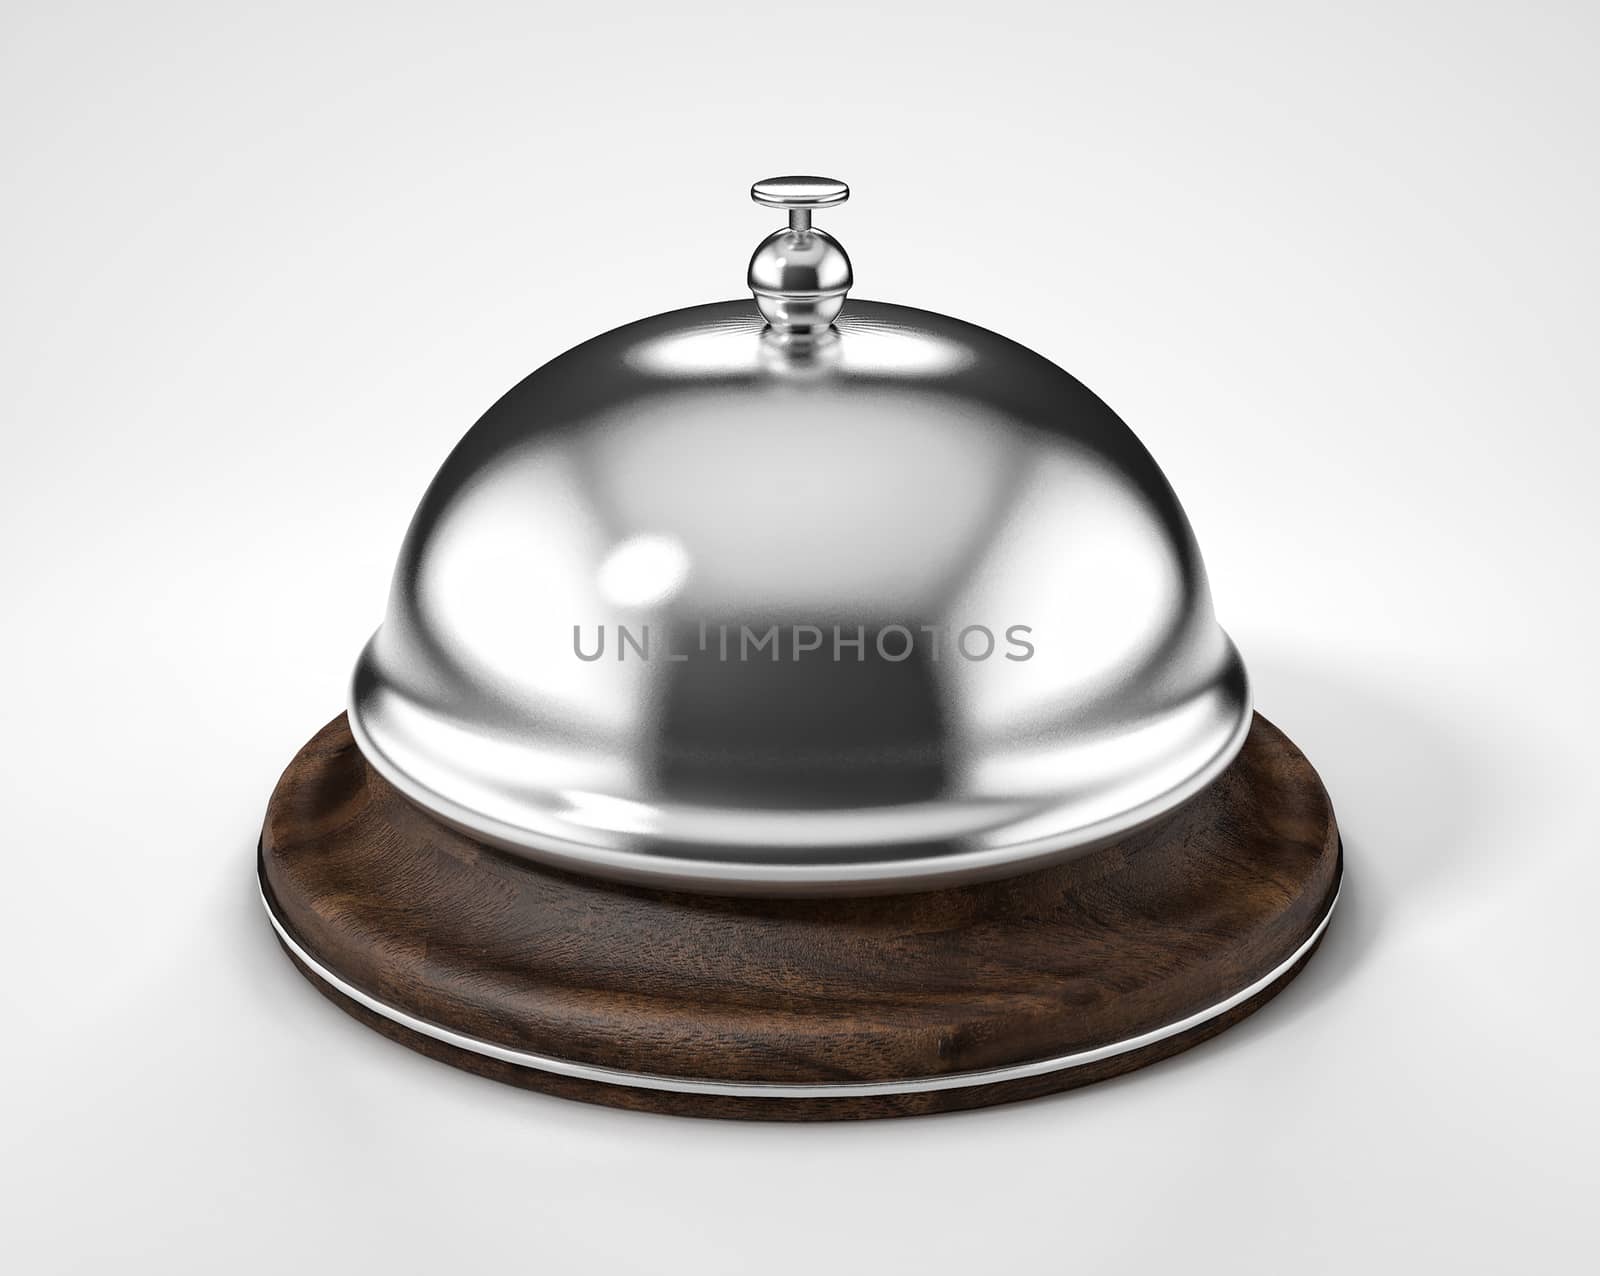 reception bell isolated on white background by xtate